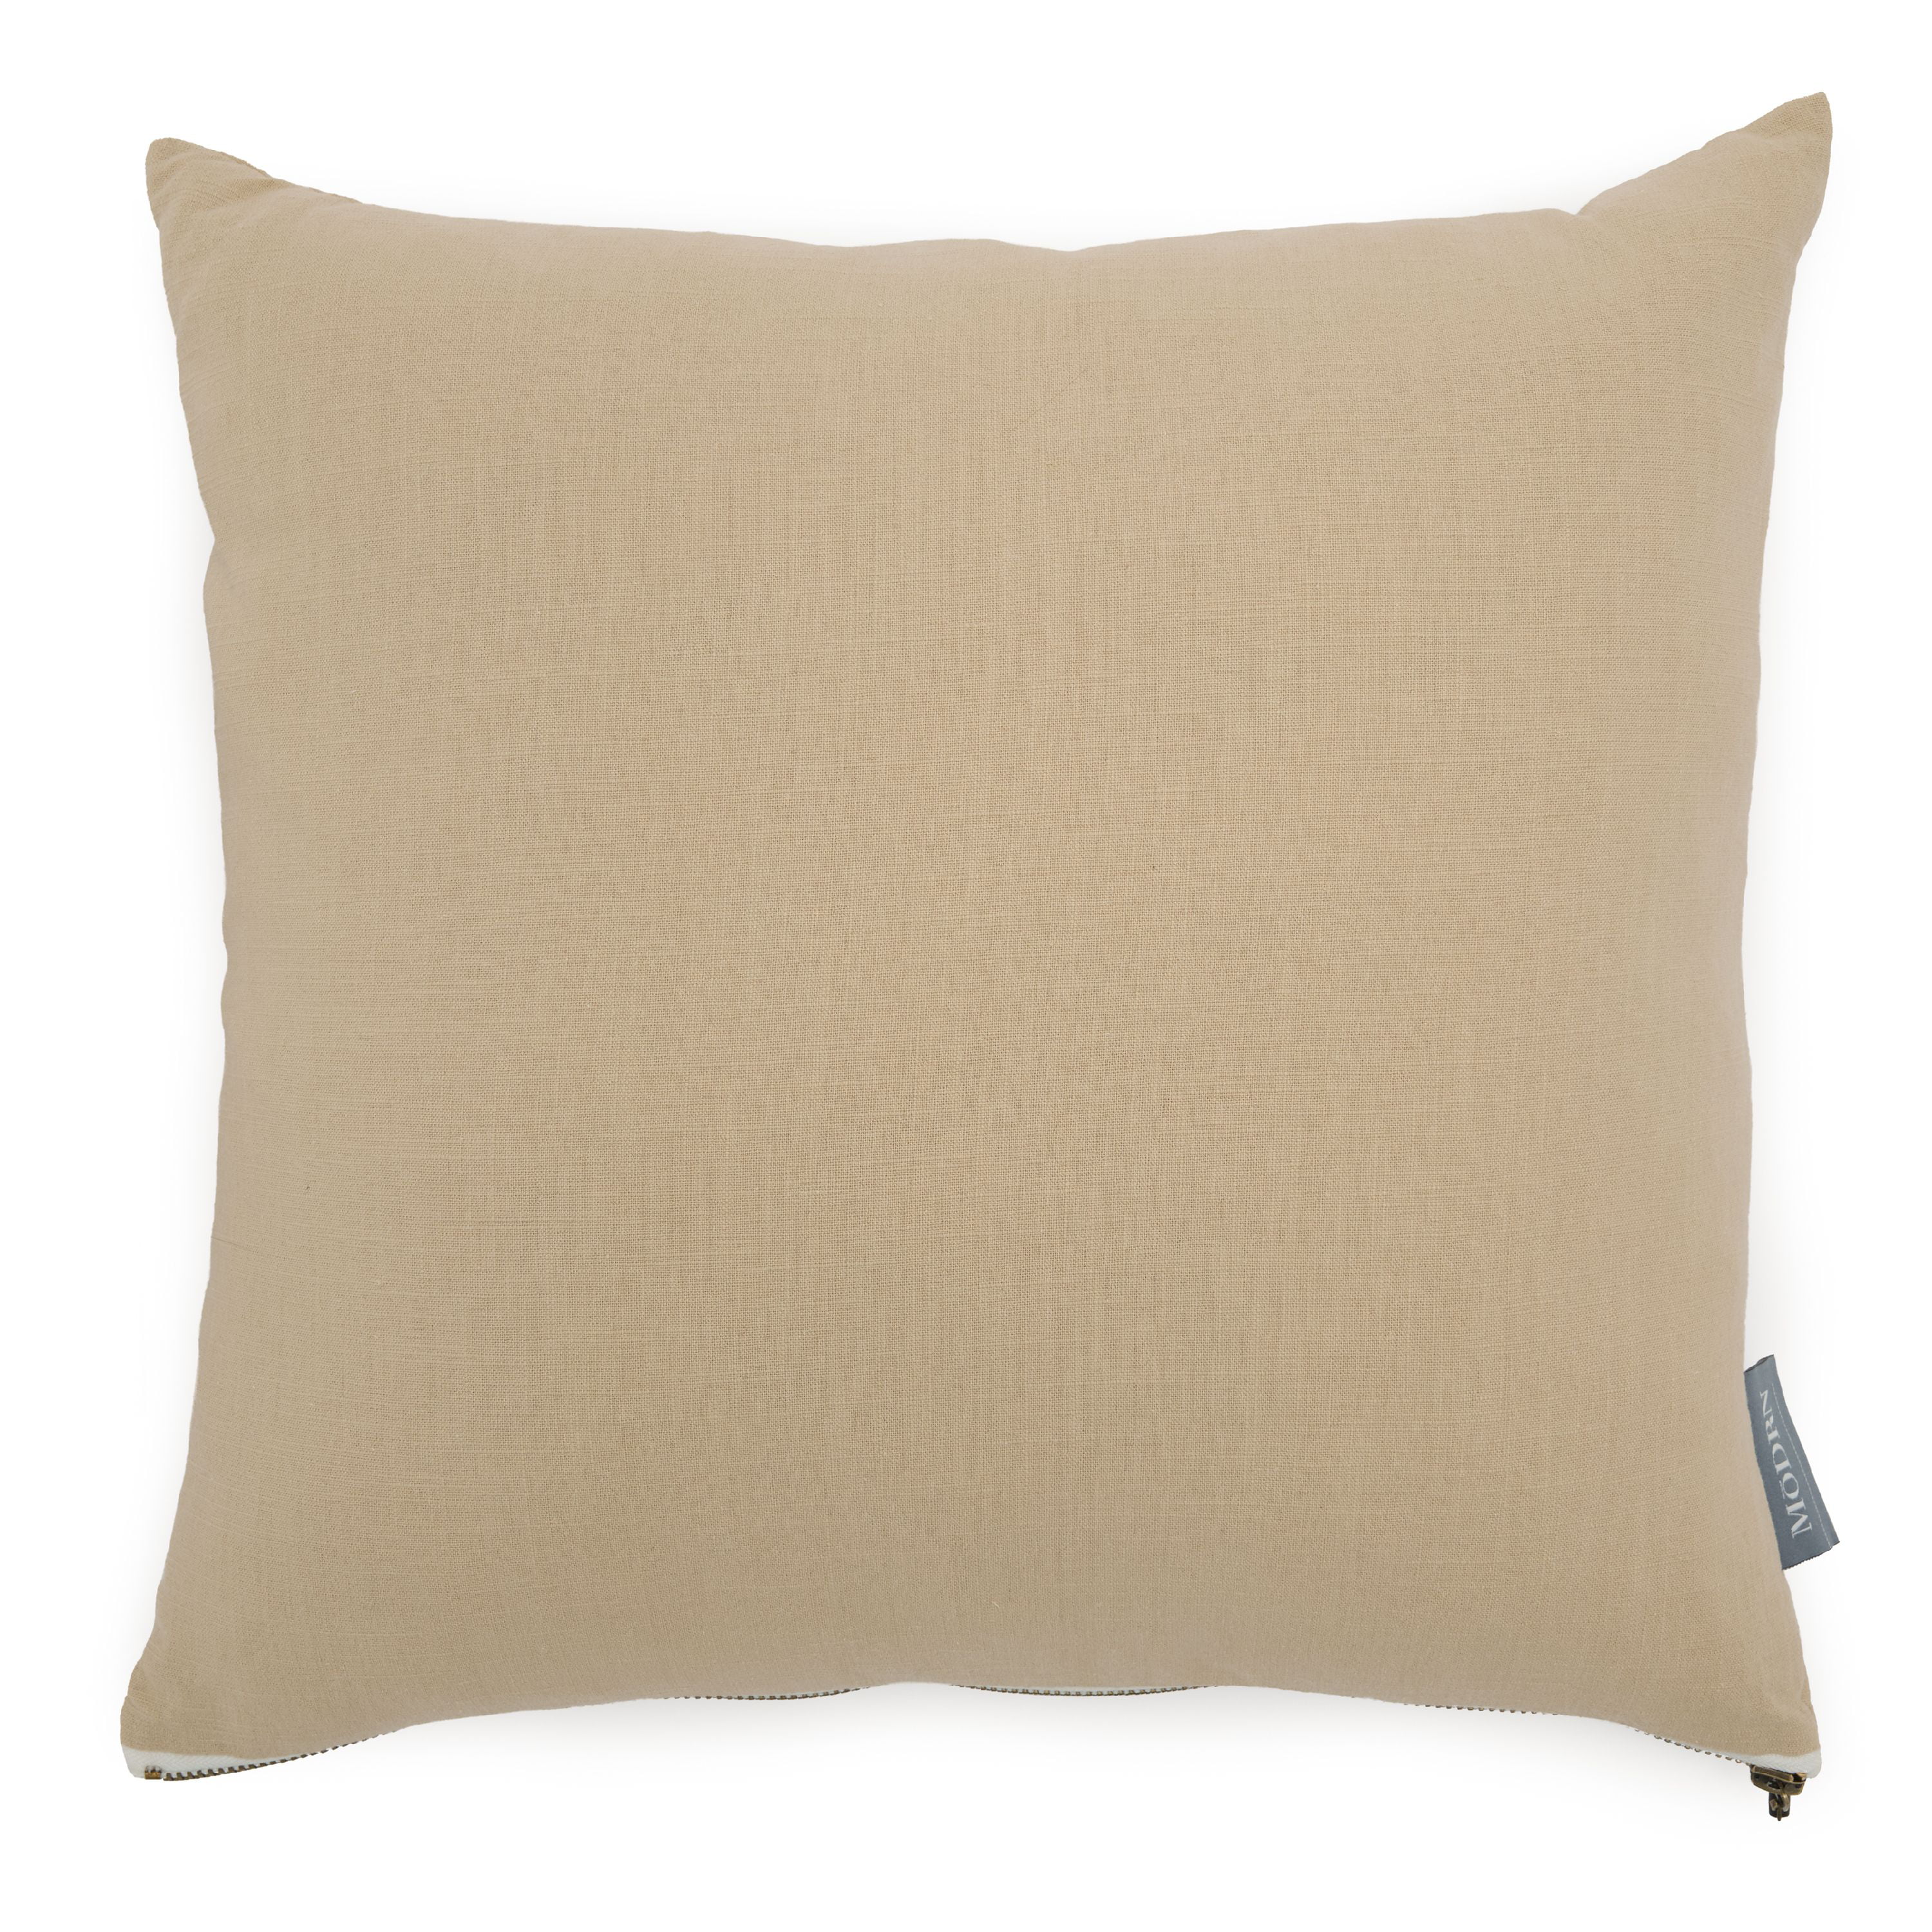 Copper Dot Cotton Embroidered Oblong Throw Pillow Gold White Mid-Century Modern One Removable Cover